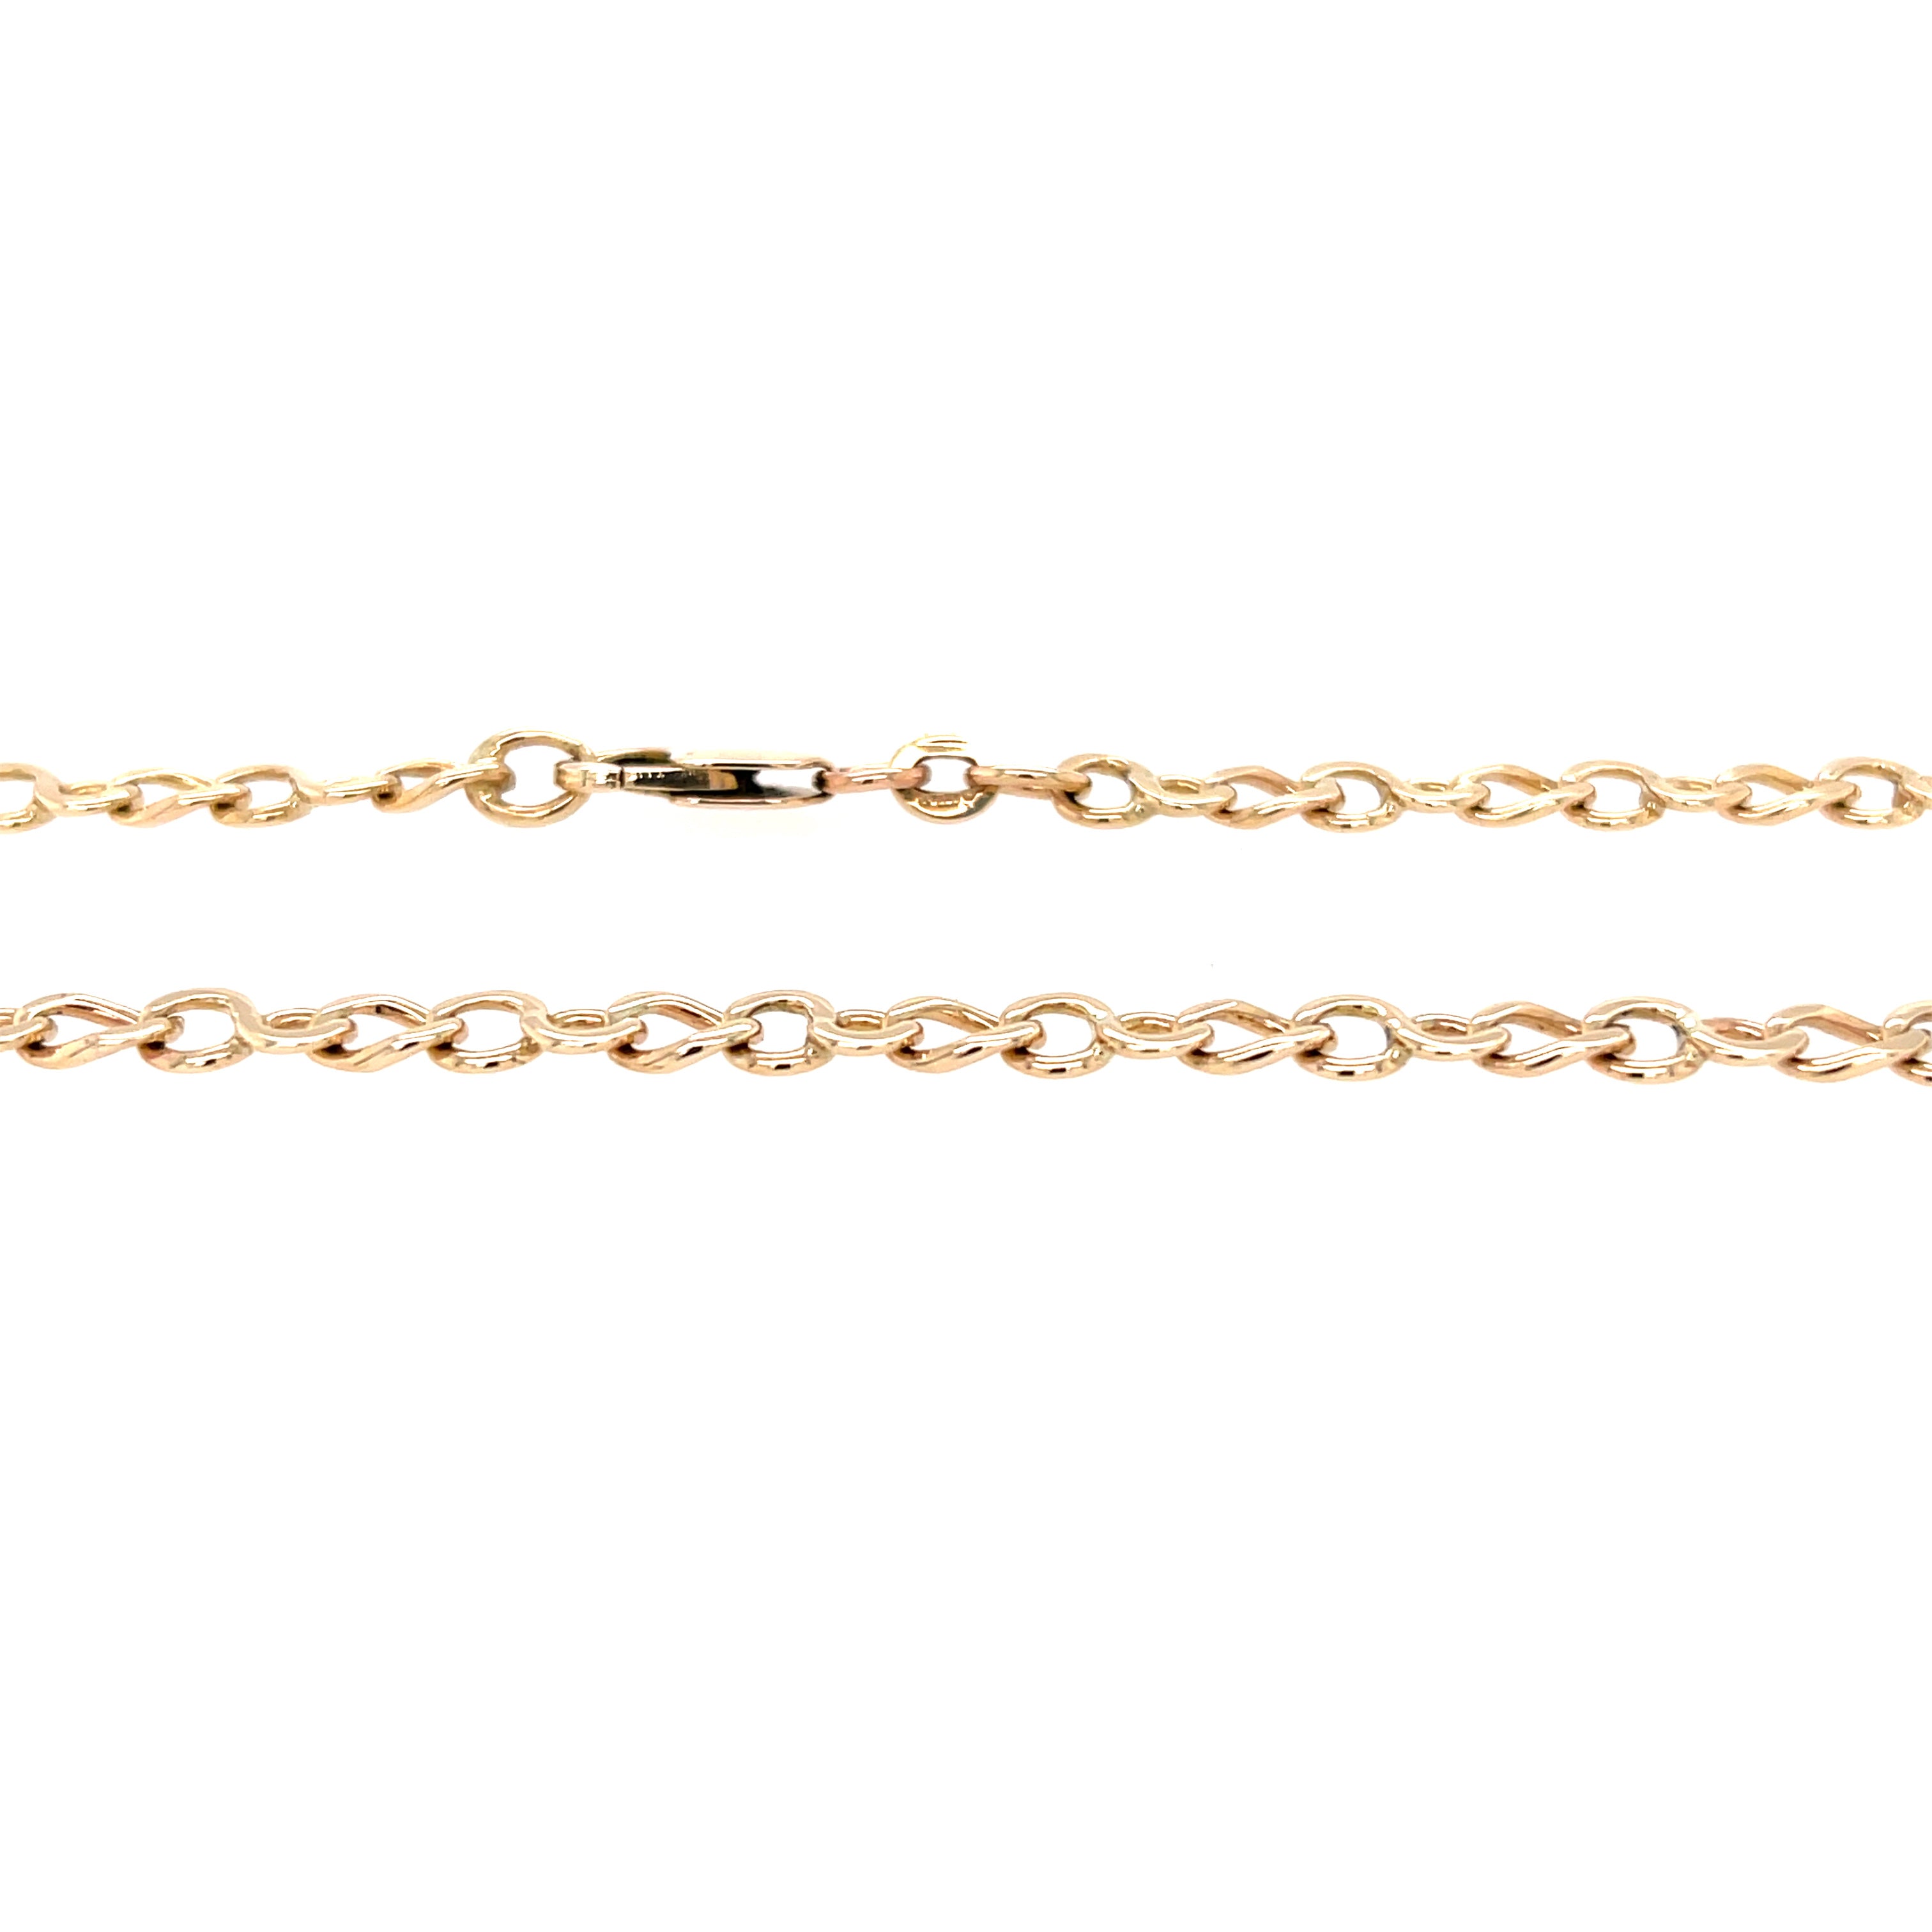 9ct Yellow Gold 19 Inch Fancy Figure 8 Link Chain Necklace - 11.63g